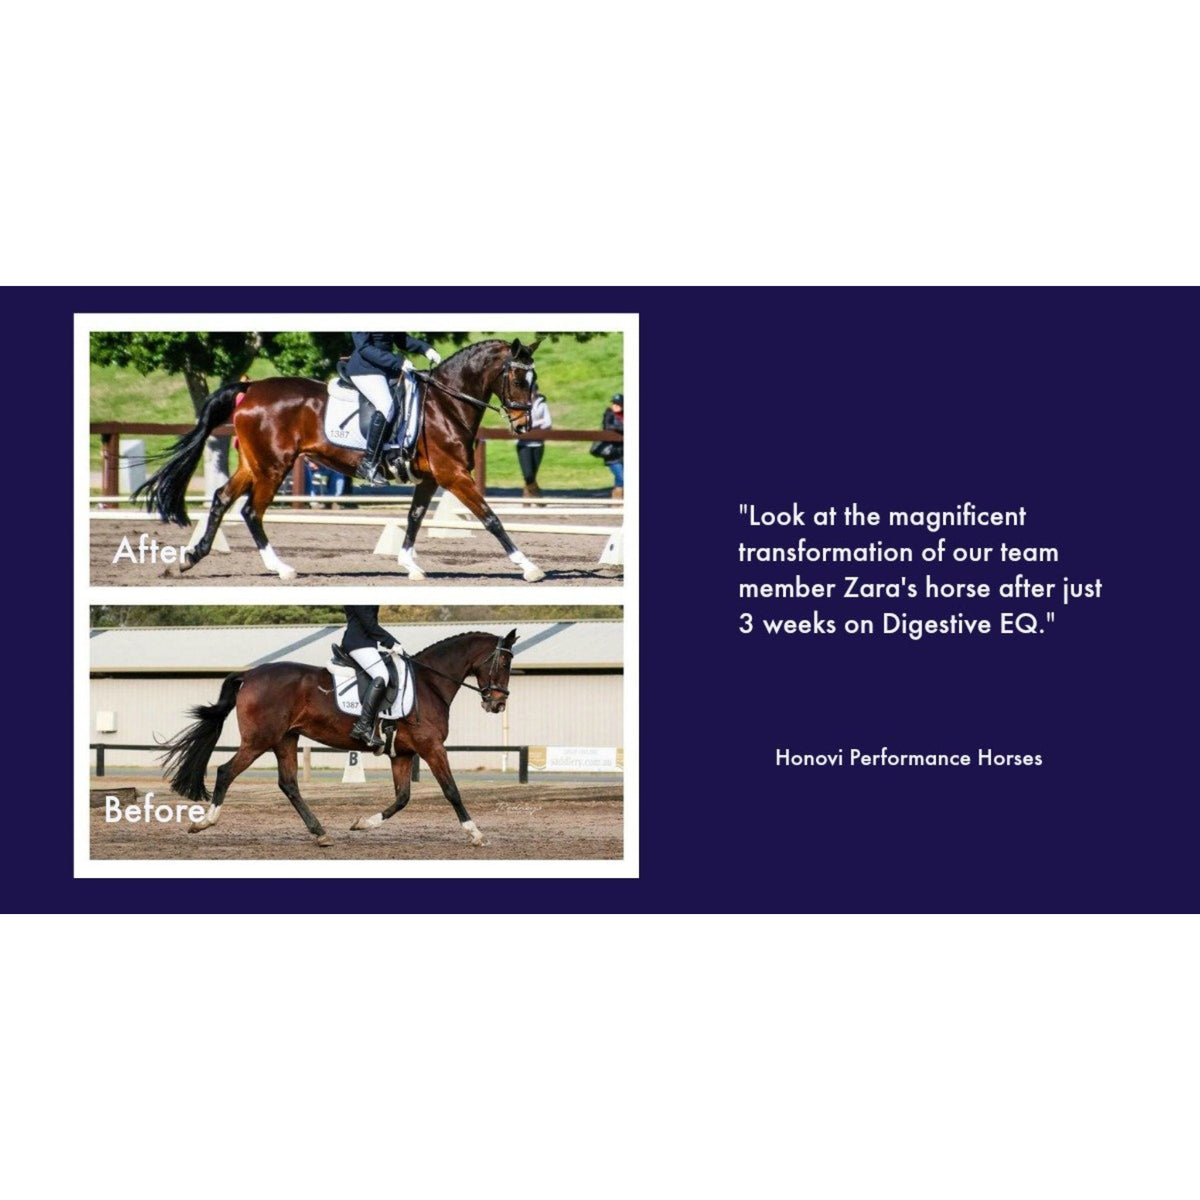 Testimonial quote and pictures to the improvement of horse on Digestive EQ.